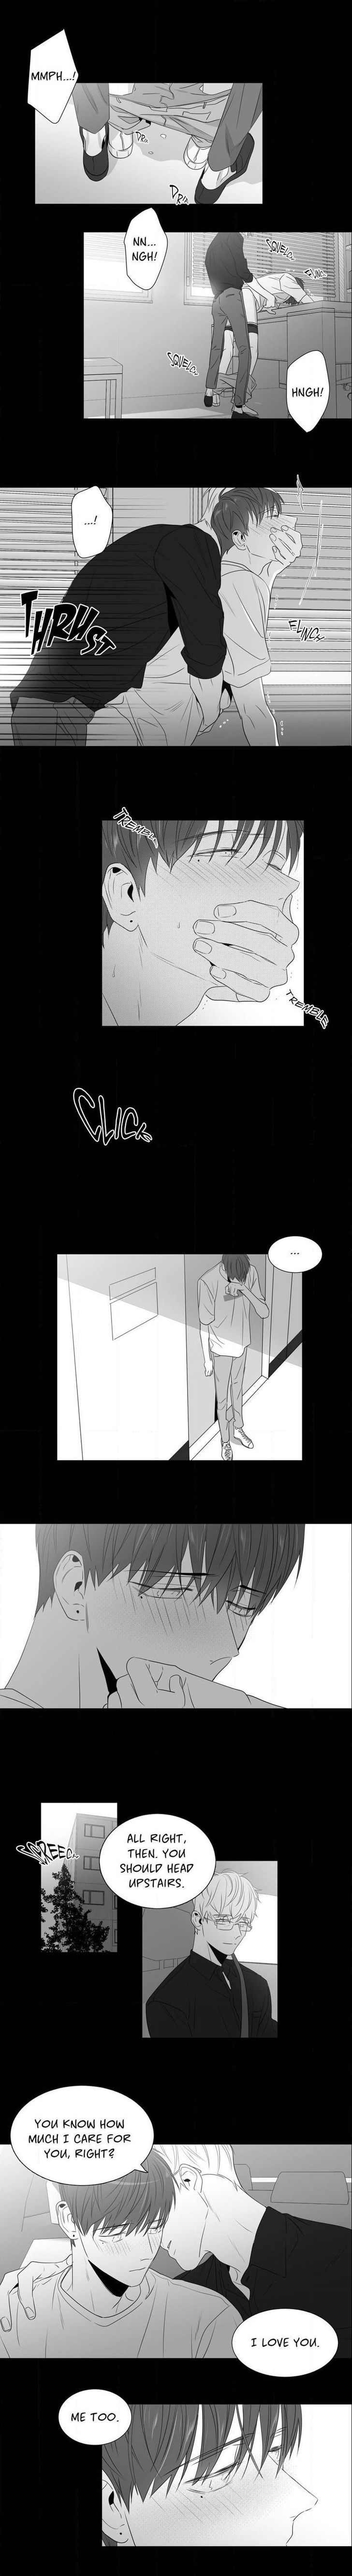 Lover Boy (Lezhin) Chapter 048.1 page 6